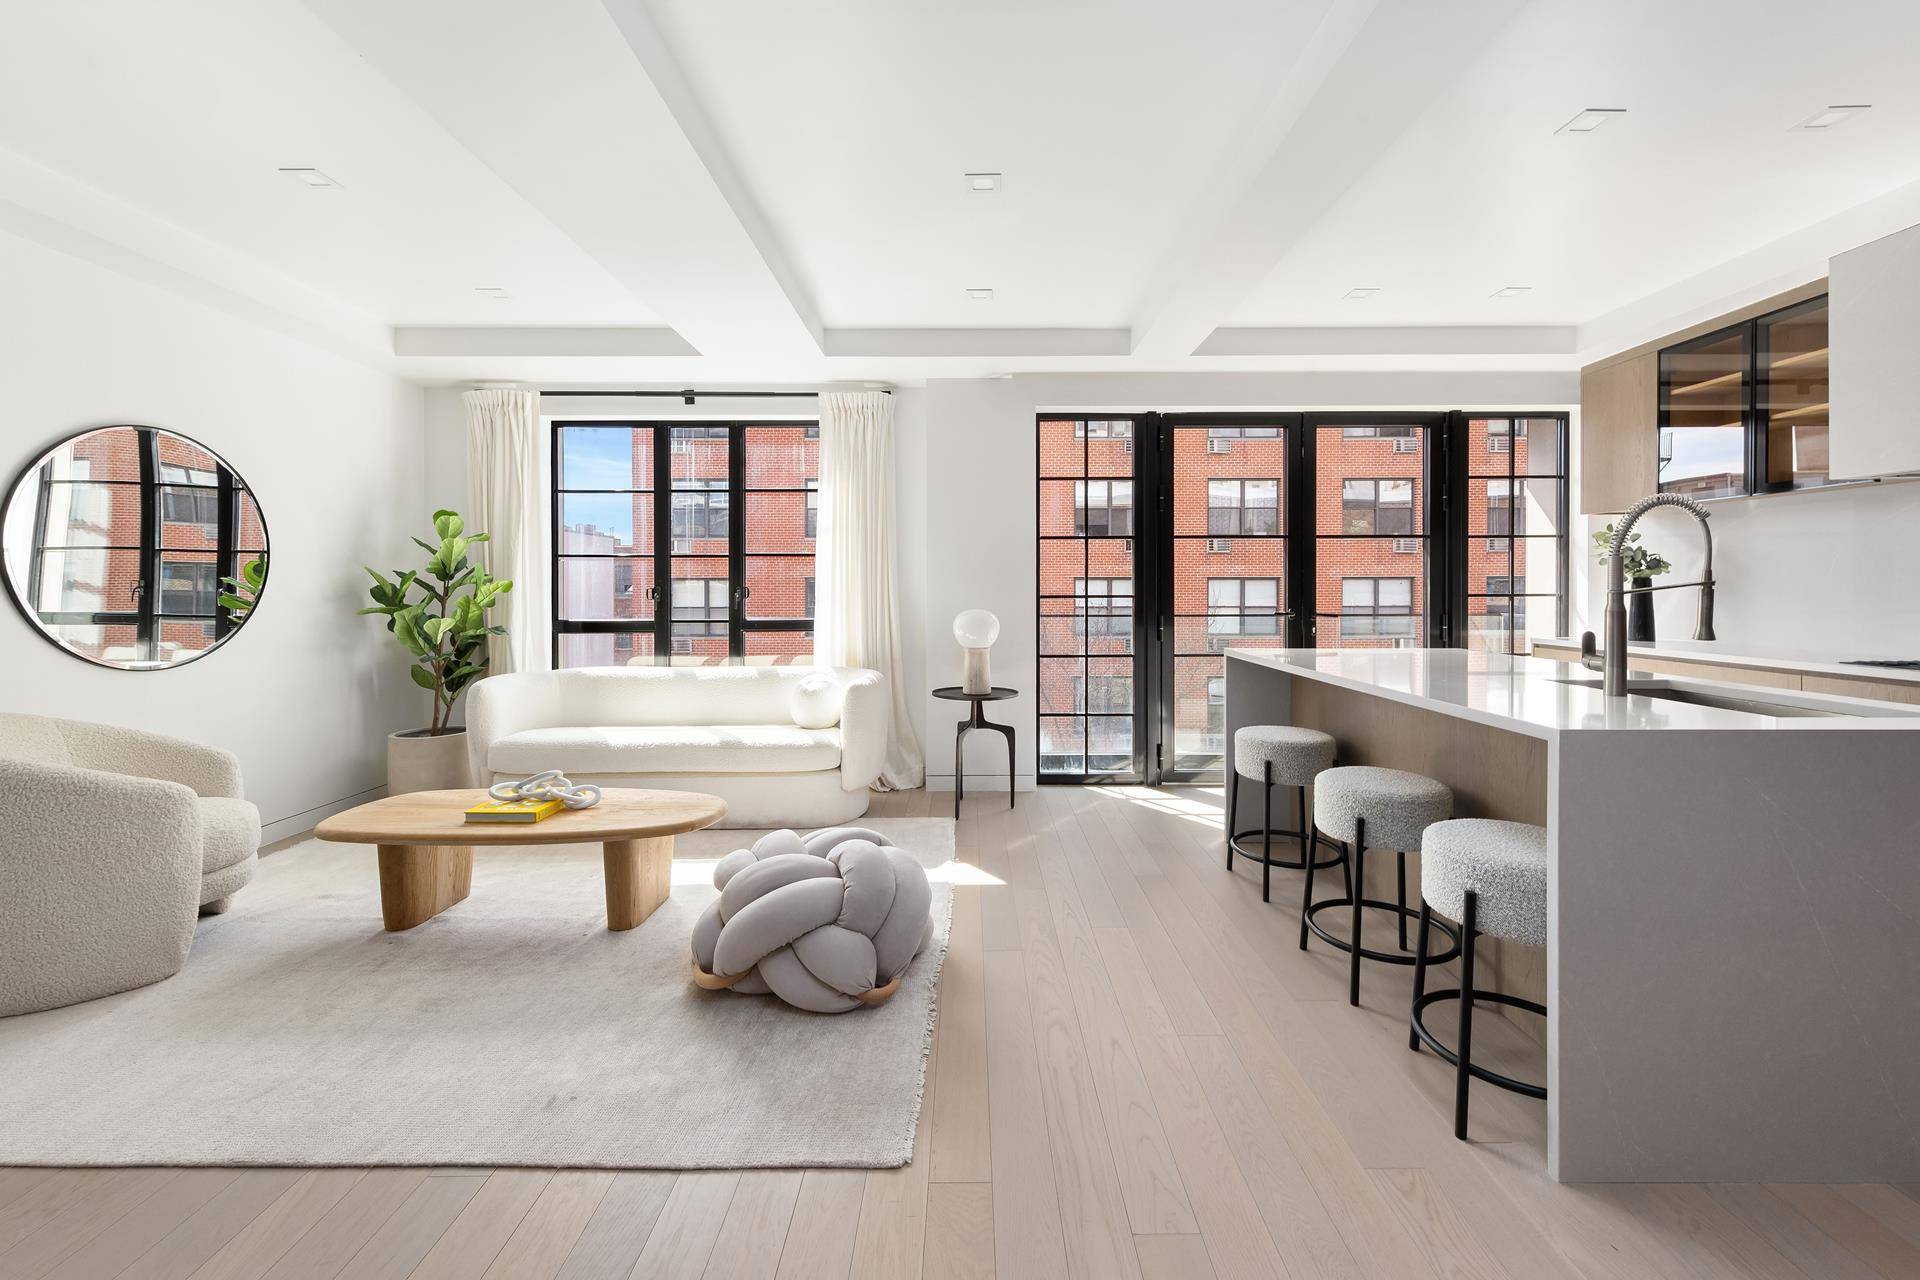 Residence 3B is a gracious 1, 345 square foot, two bedroom, two bathroom home with ample natural light and views of the historical tree lined Gramercy Park streets.